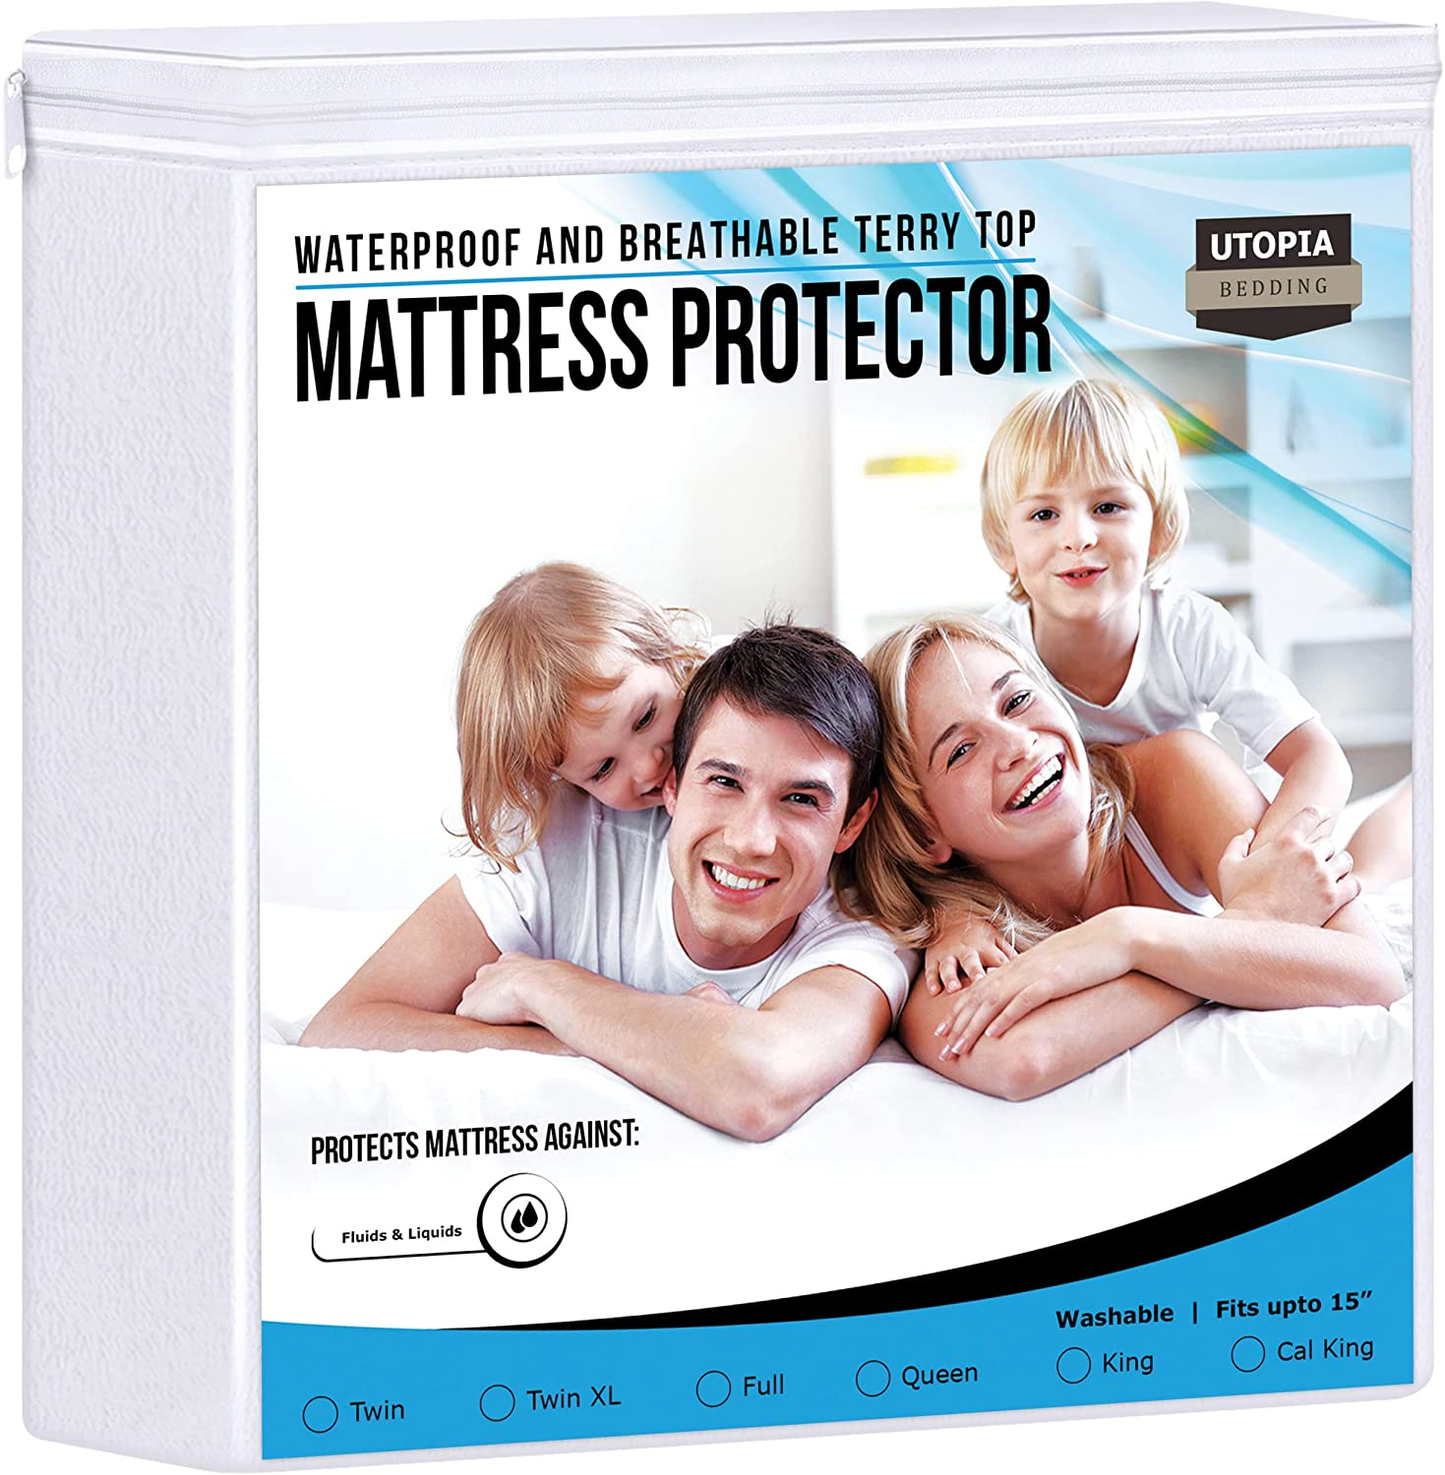  Premium Waterproof Terry Mattress Protector Twin 200 GSM, Mattress Cover, Breathable, Fitted Style with Stretchable Pockets